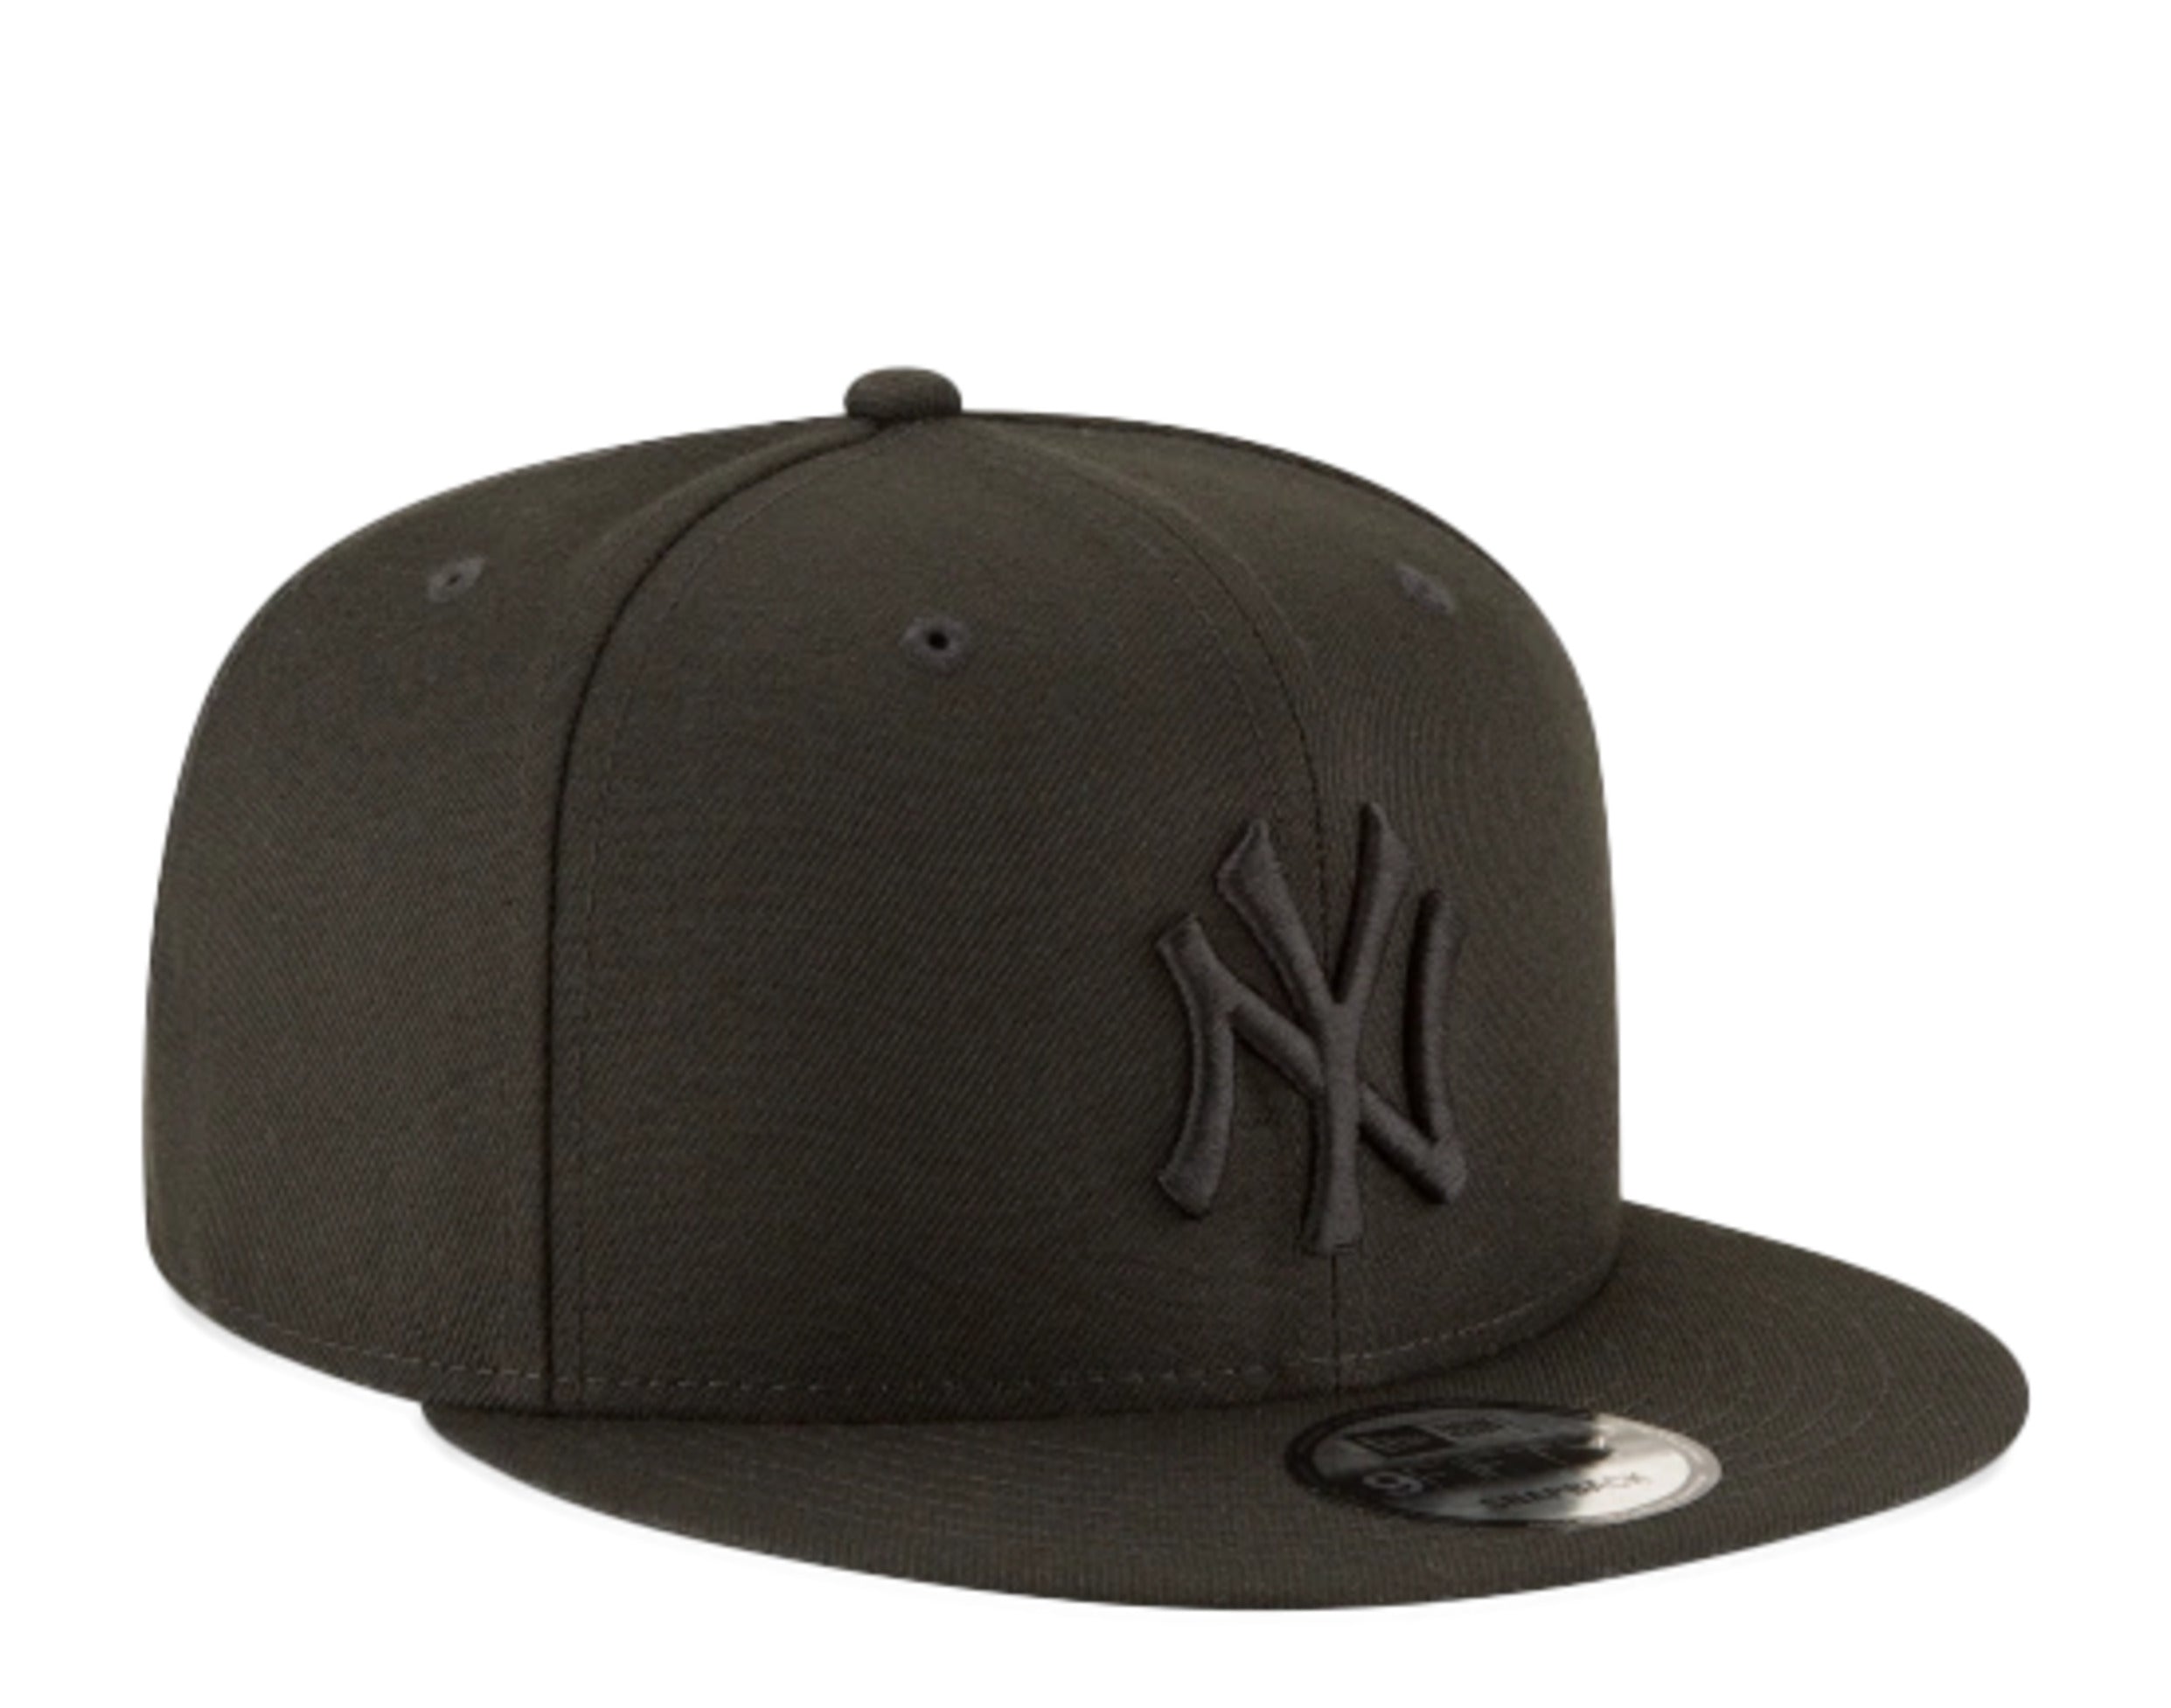 New Era New Jersey Devils Black White Team Color 9FIFTY Snapback